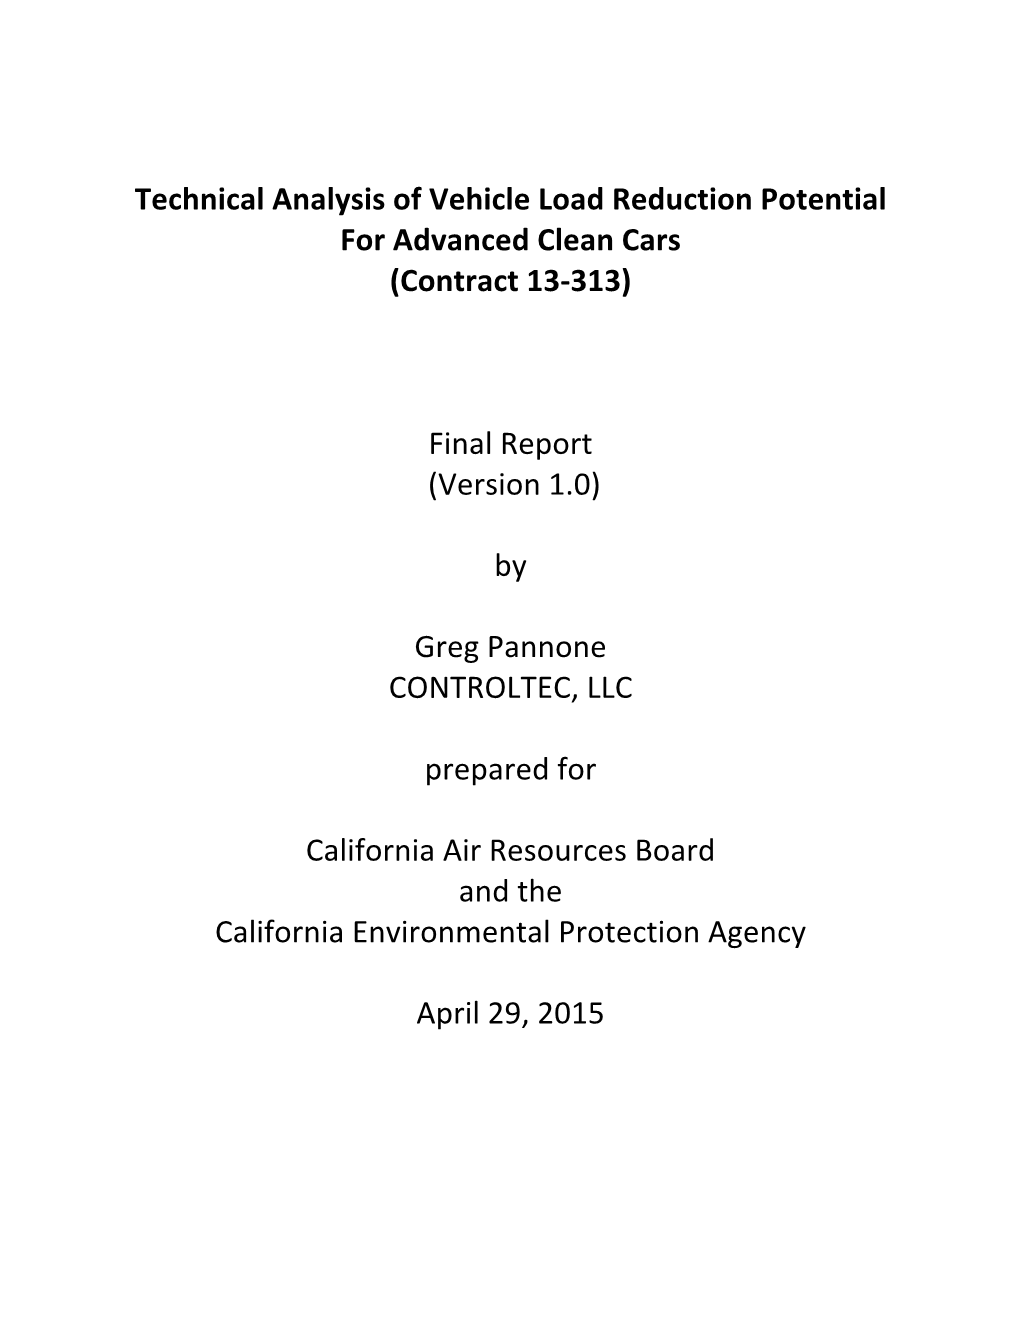 Technical Analysis of Vehicle Load Reduction Potential for Advanced Clean Cars (Contract 13-313)